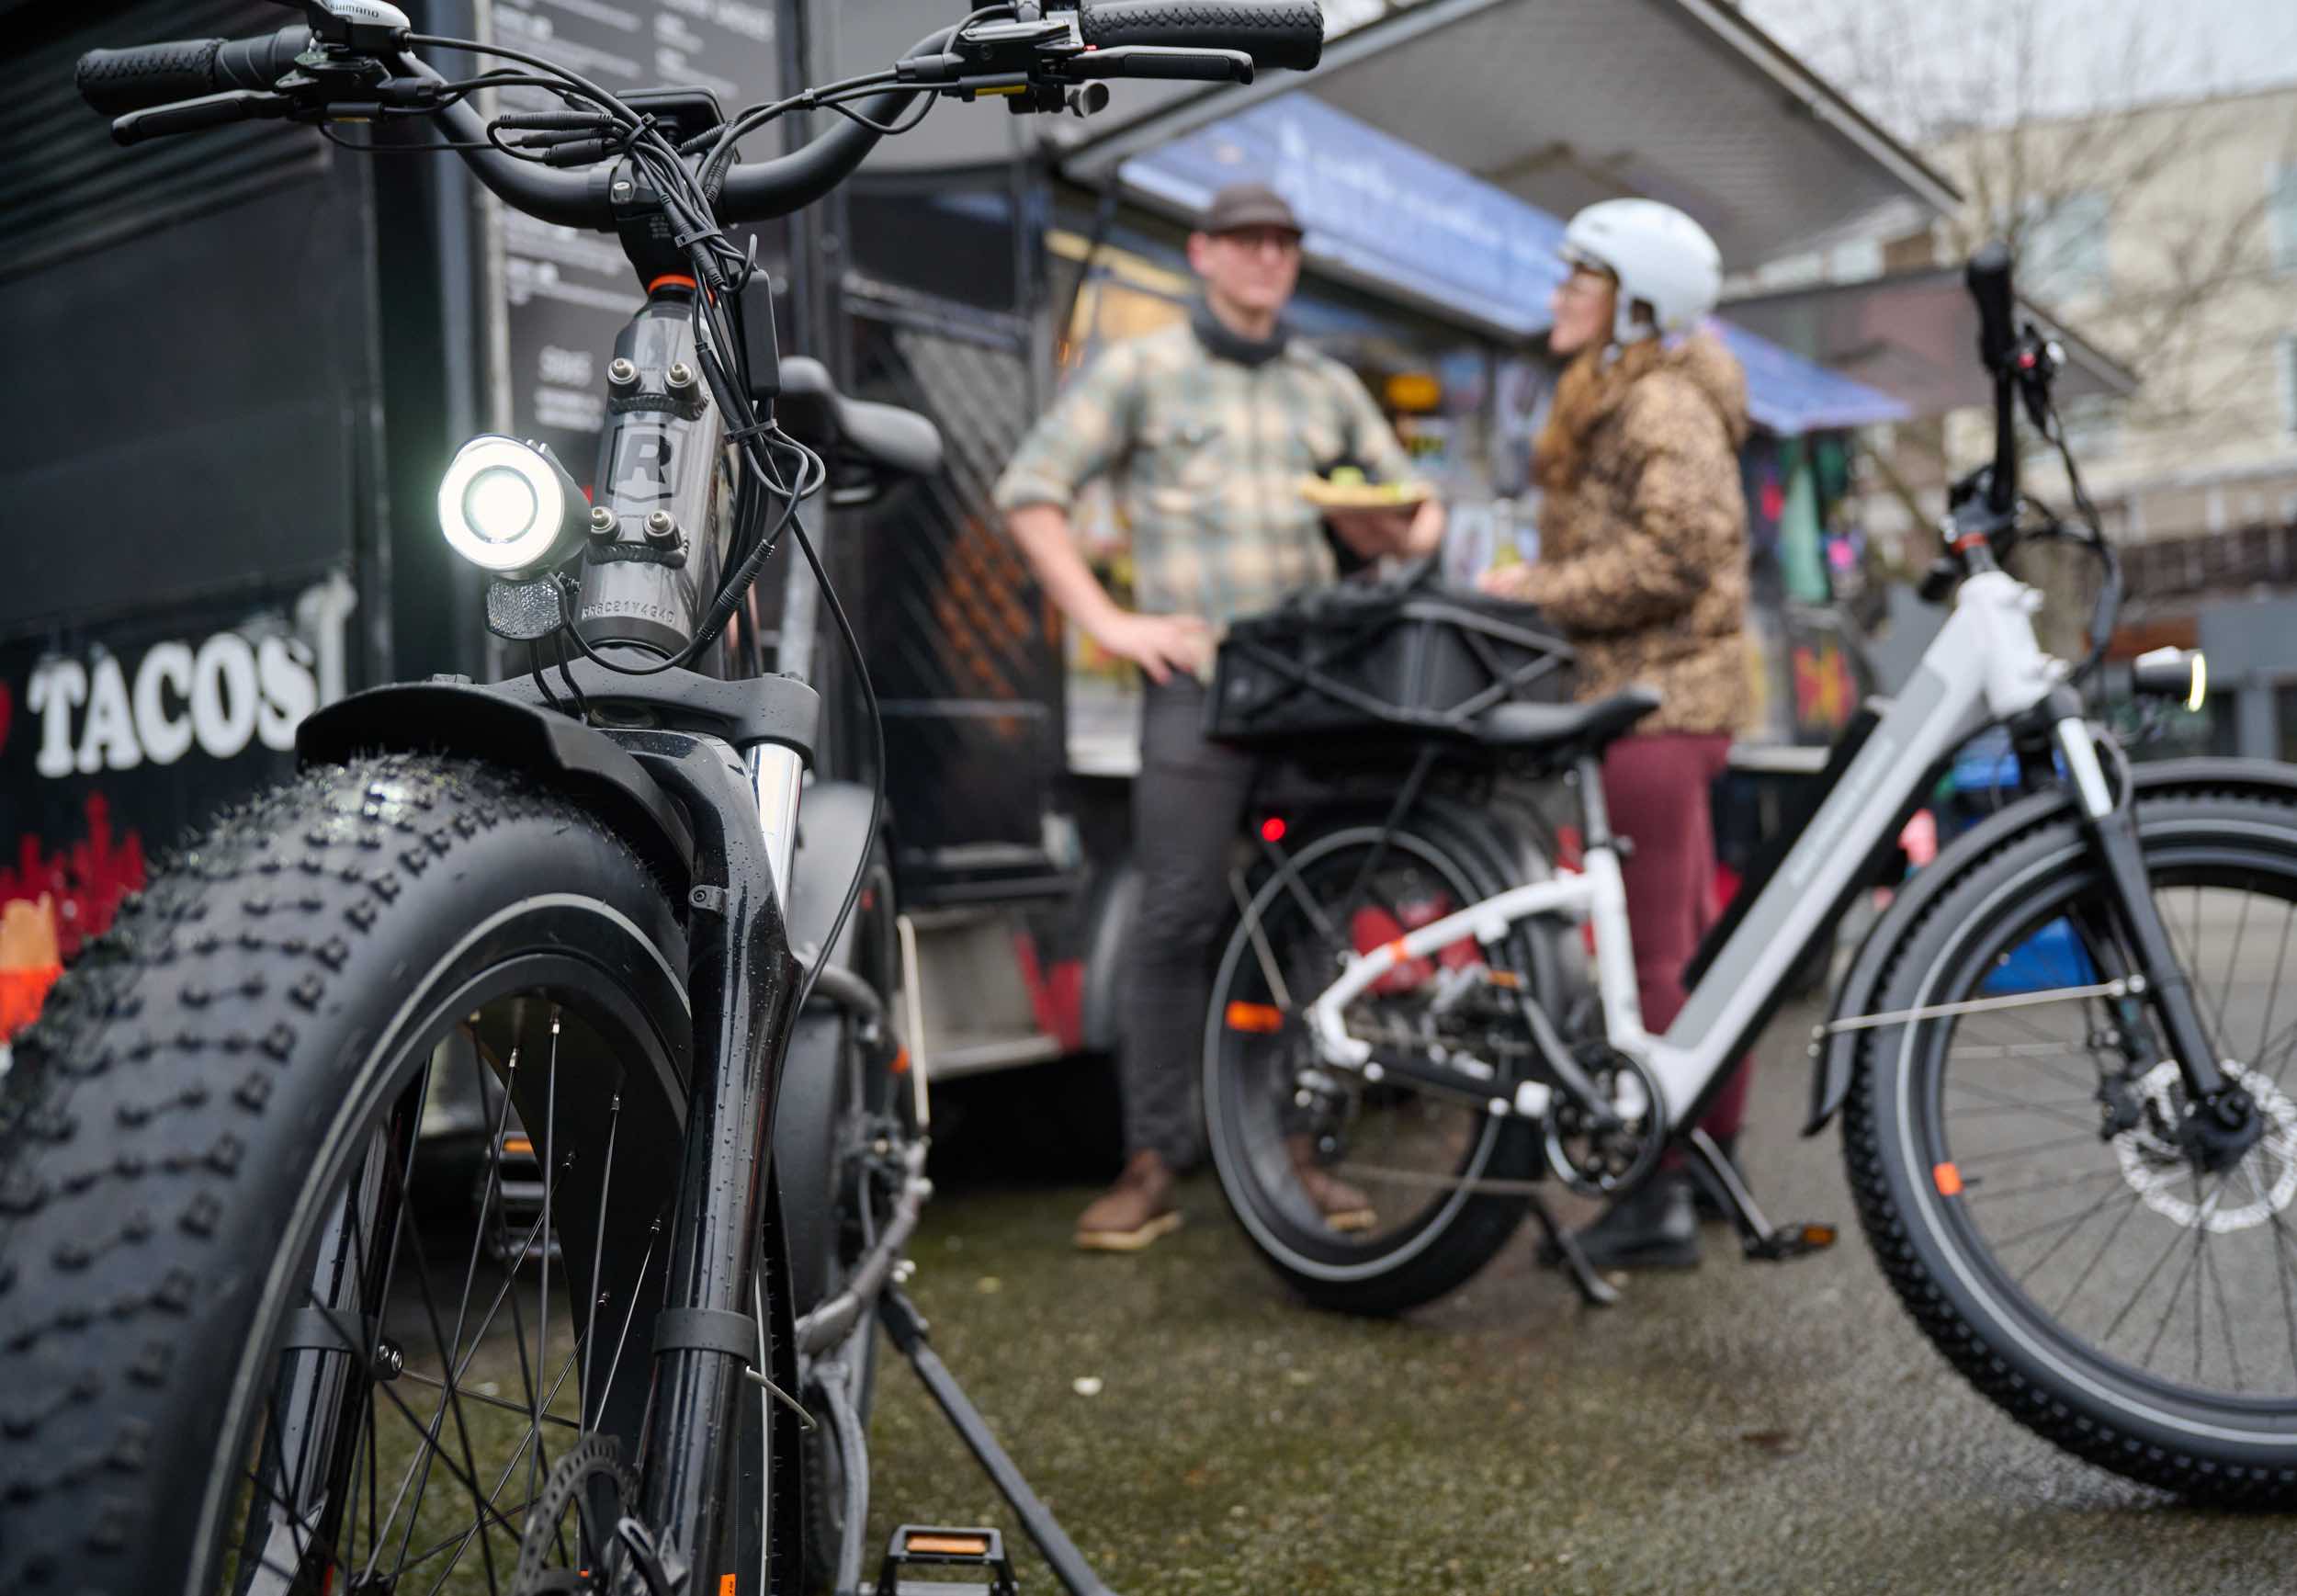 Gas Prices Reach 5 per Gallon Discover How an Ebike Can Help You Cut Costsb4d122824 0